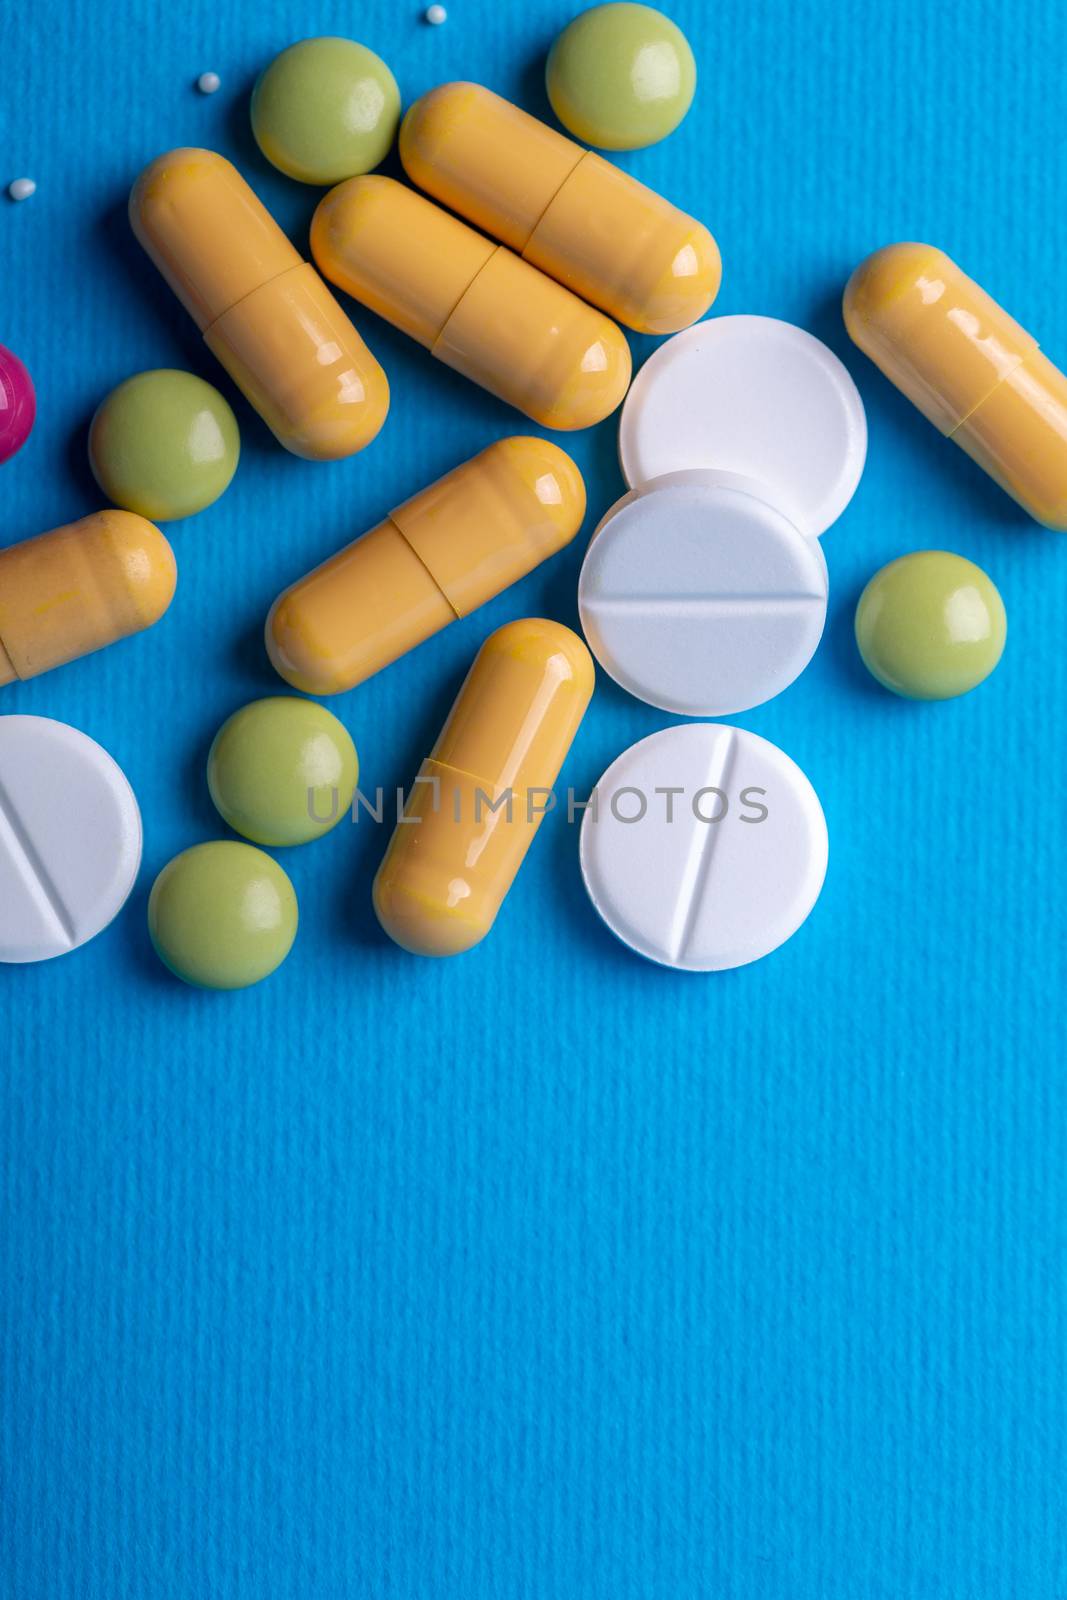 Top view with white pills surrounded by yellow capsules and green pills. Copy space and blue background